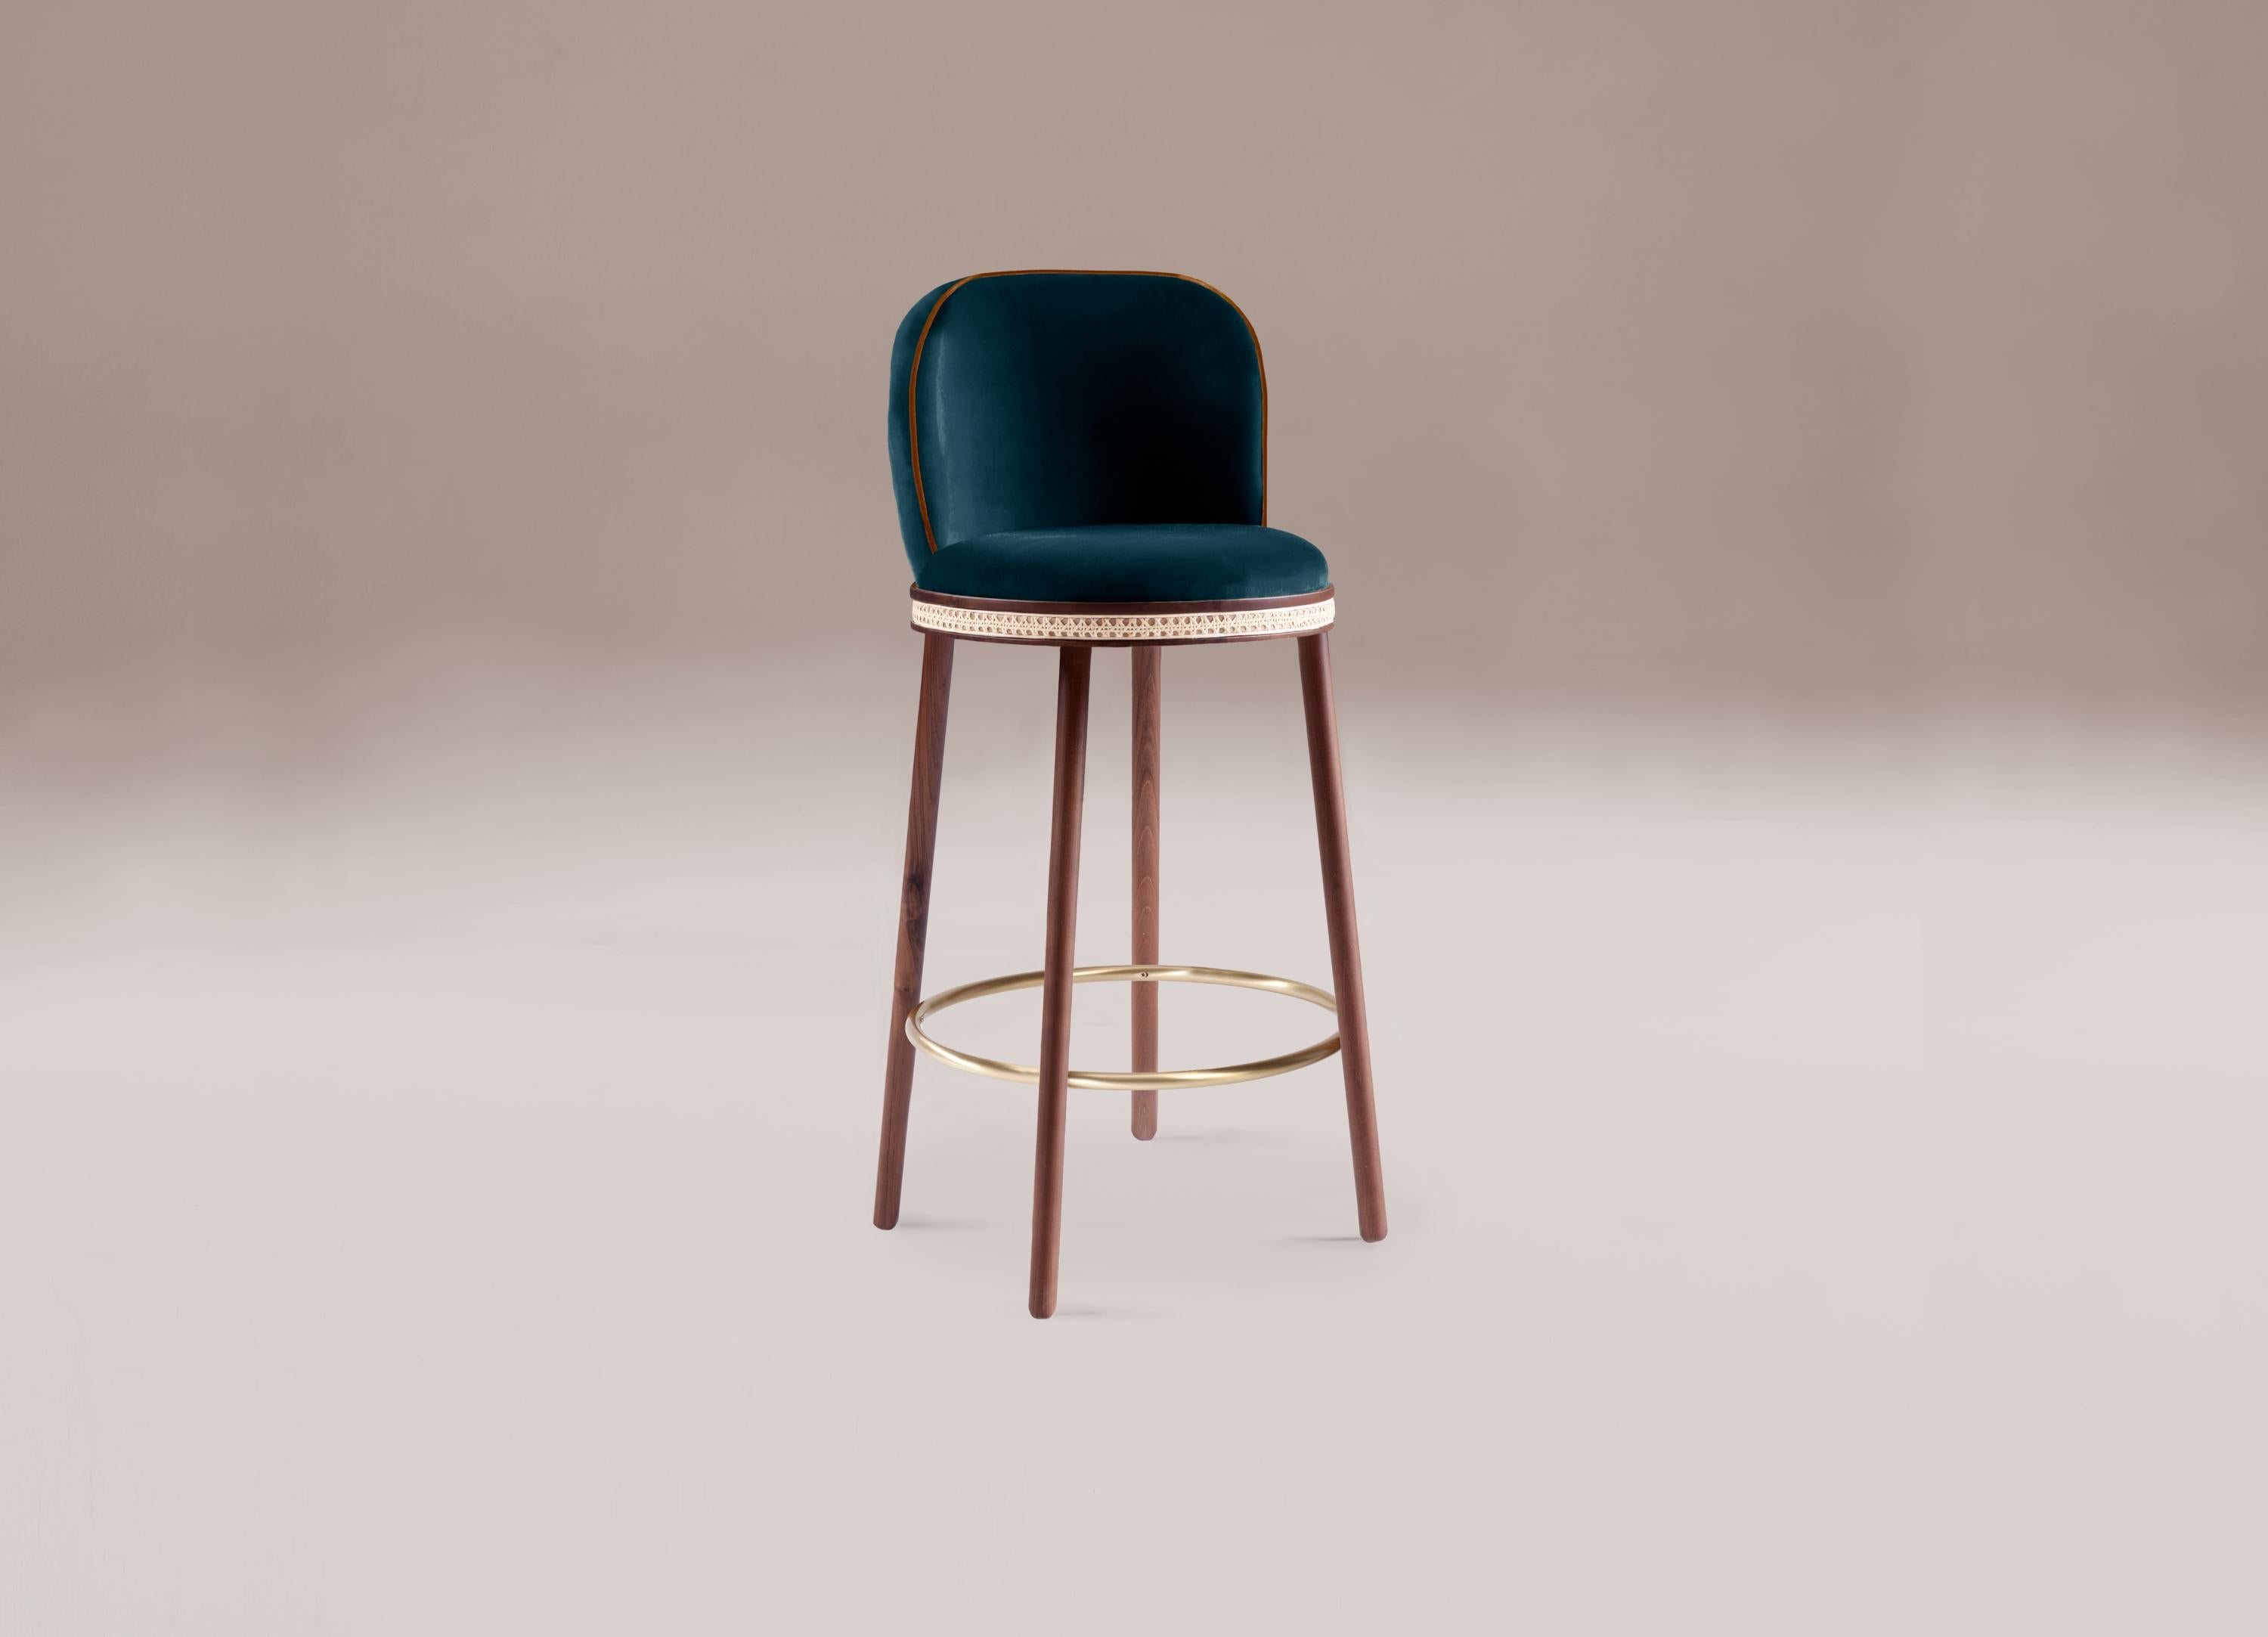 Bar chair - Alma by Dooq 
Dimensions:
W 46 cm 18”
D 51 cm 20”
H 100 cm 39”
seat height: 75 cm 30”
Materials: upholstery fabric or leather; structure solid wood feet lacquered MDF or solid wood rattan natural rattan. COM with natural walnut or